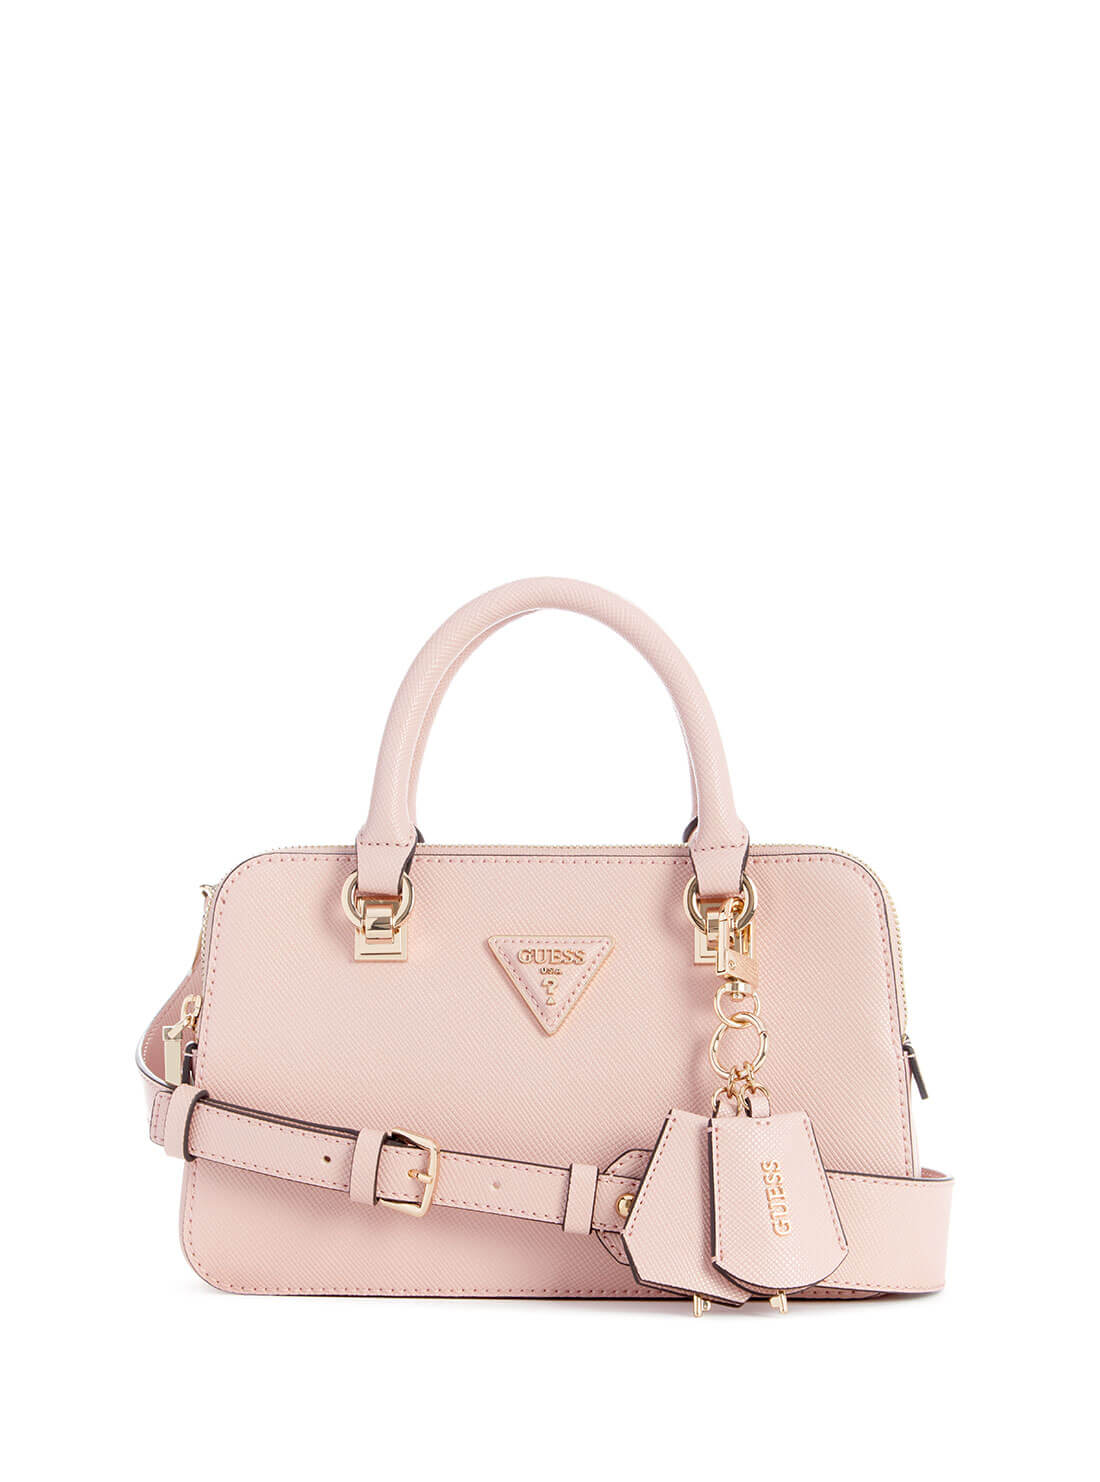 Women's Blush Pink Brynlee Small Status Satchel Bag front view